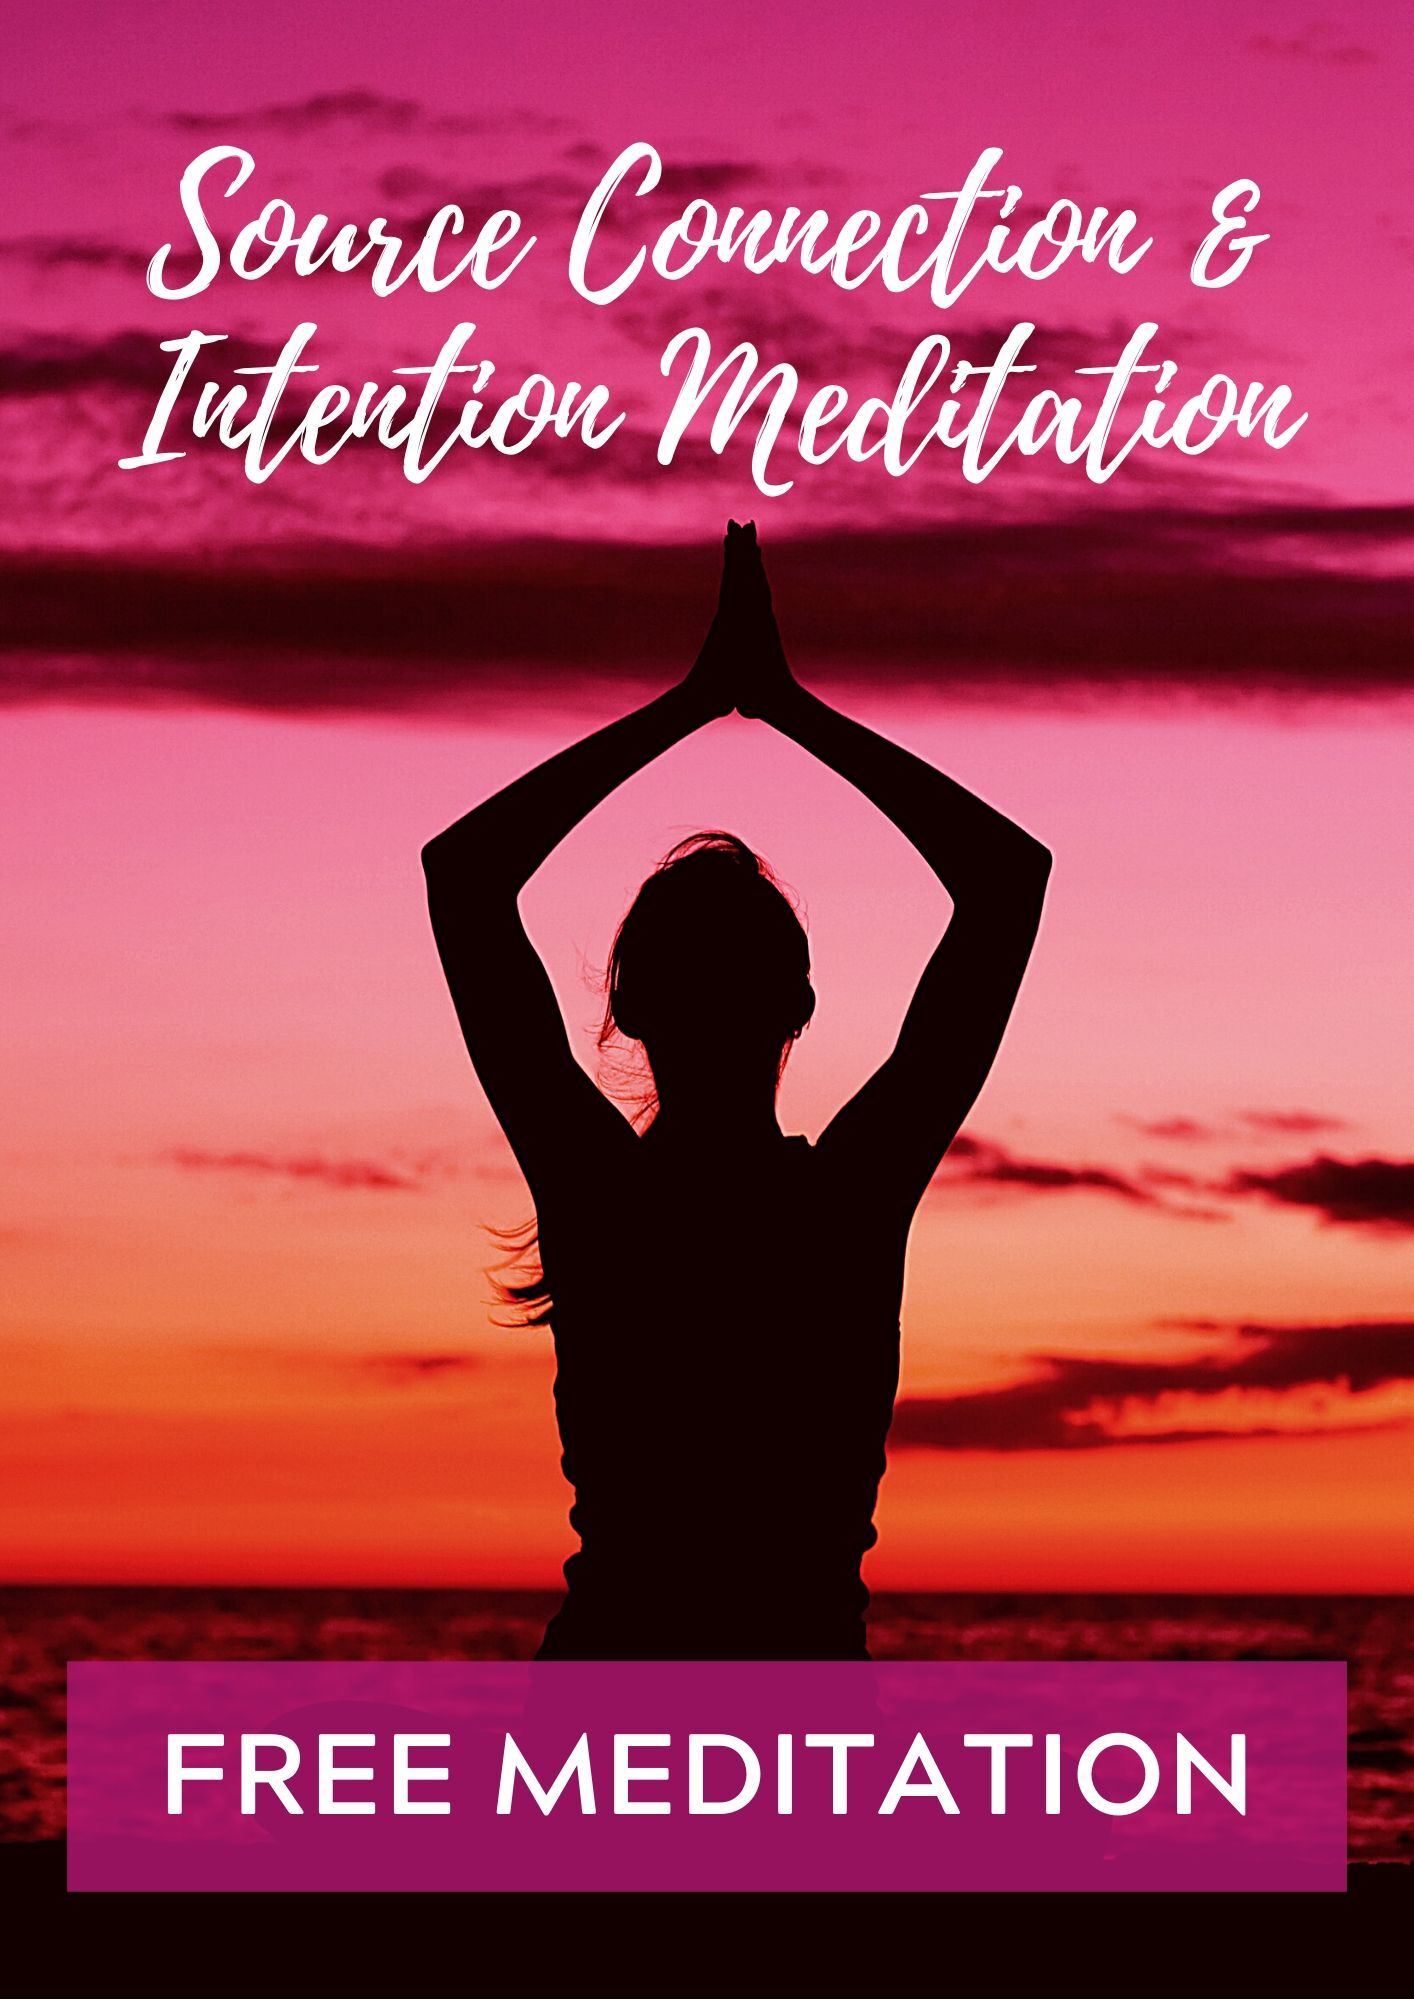 SOURCE_CONNECTION_INTENTION_MEDITATION_What_does_freedom_really_mean_and_would_you_like_more__a9gl8.jpg